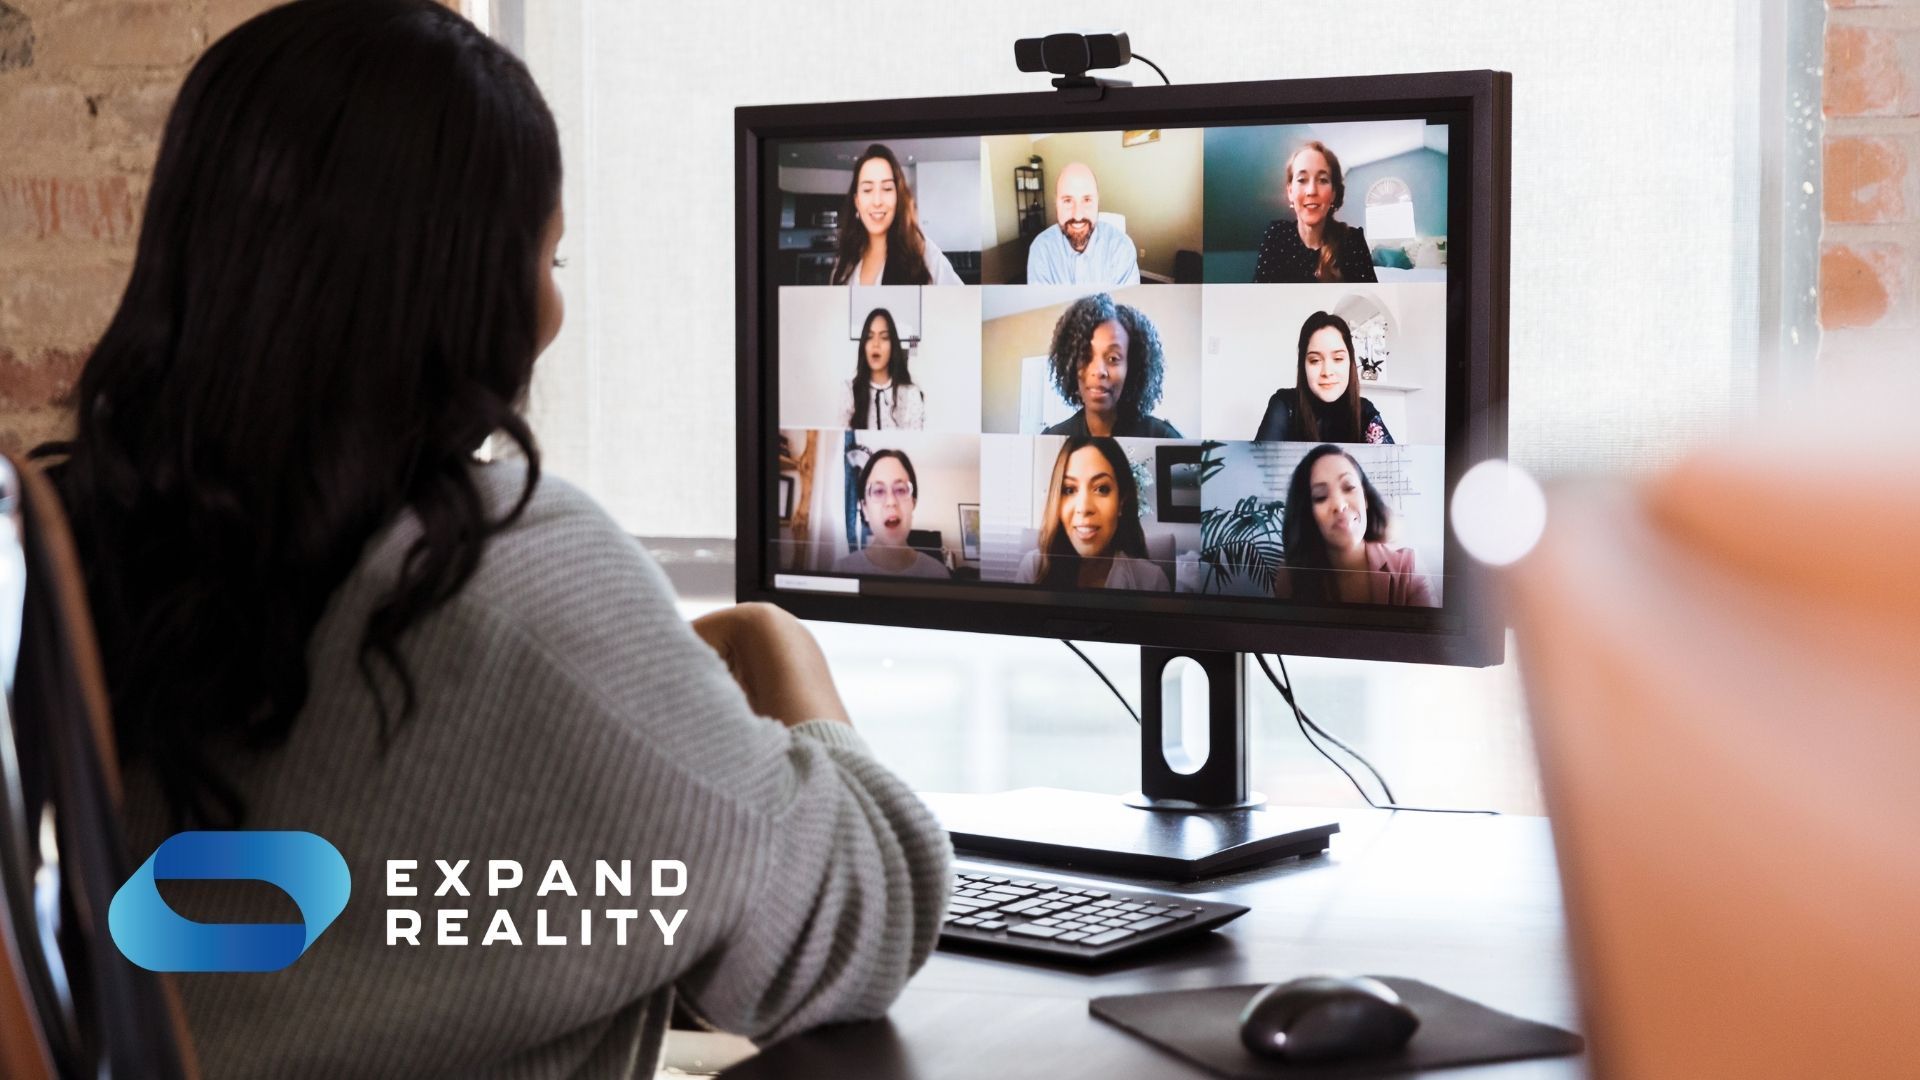 Virtual meetings have skyrocketed over recent years. But what value do they add – and where are they going next? Discover more in our 5-minute read.